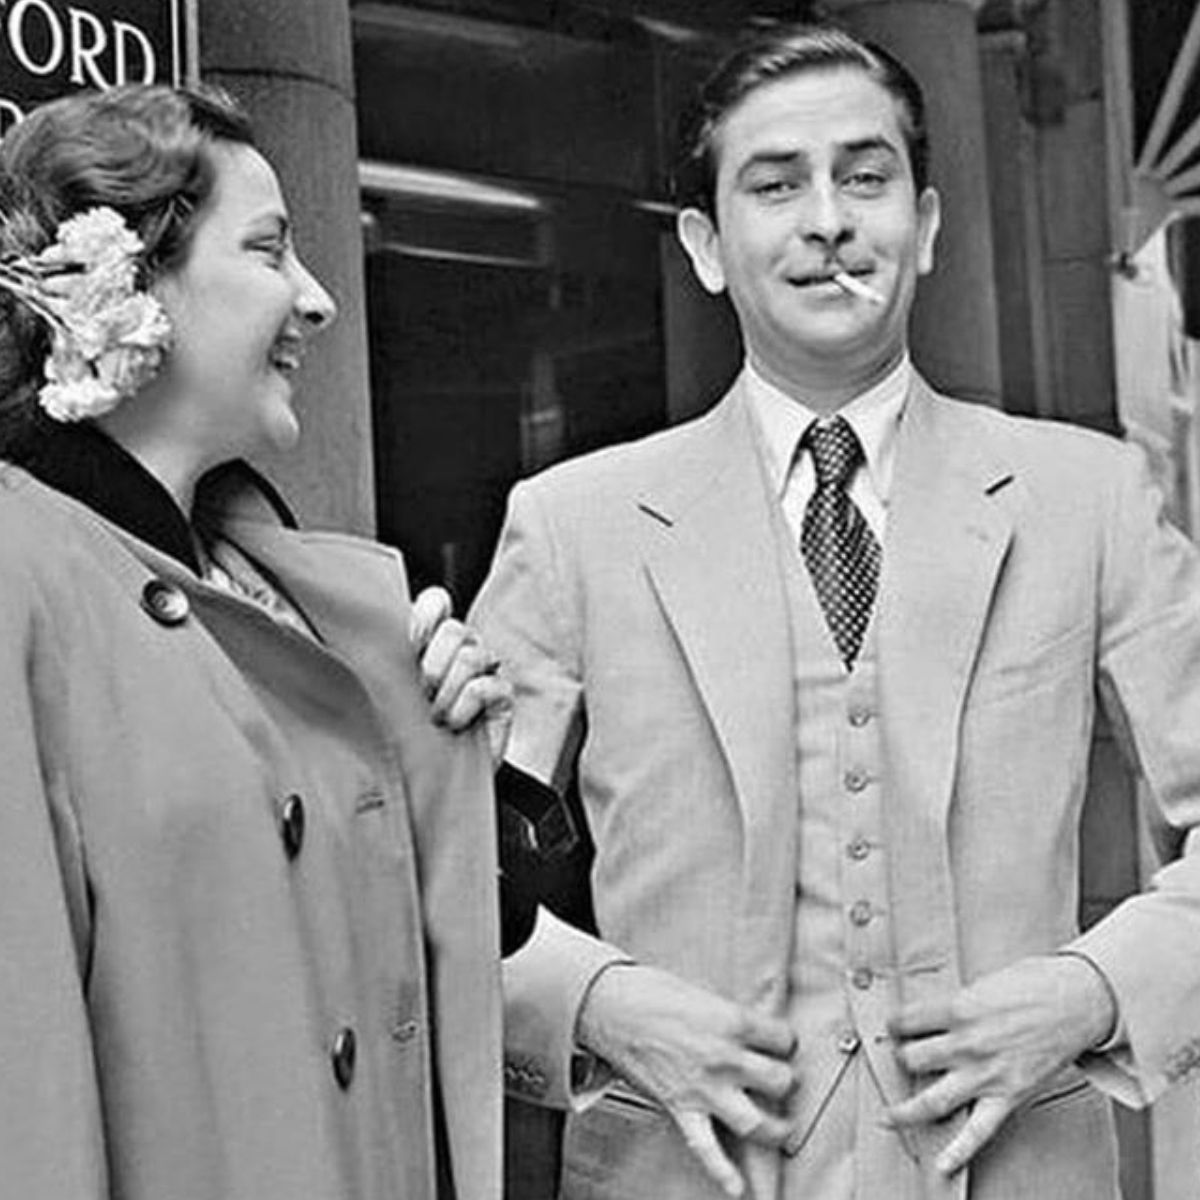 Karisma Kapoor shares a RARE photo of her 'handsome Dadaji' Raj Kapoor from the archives; See Pic